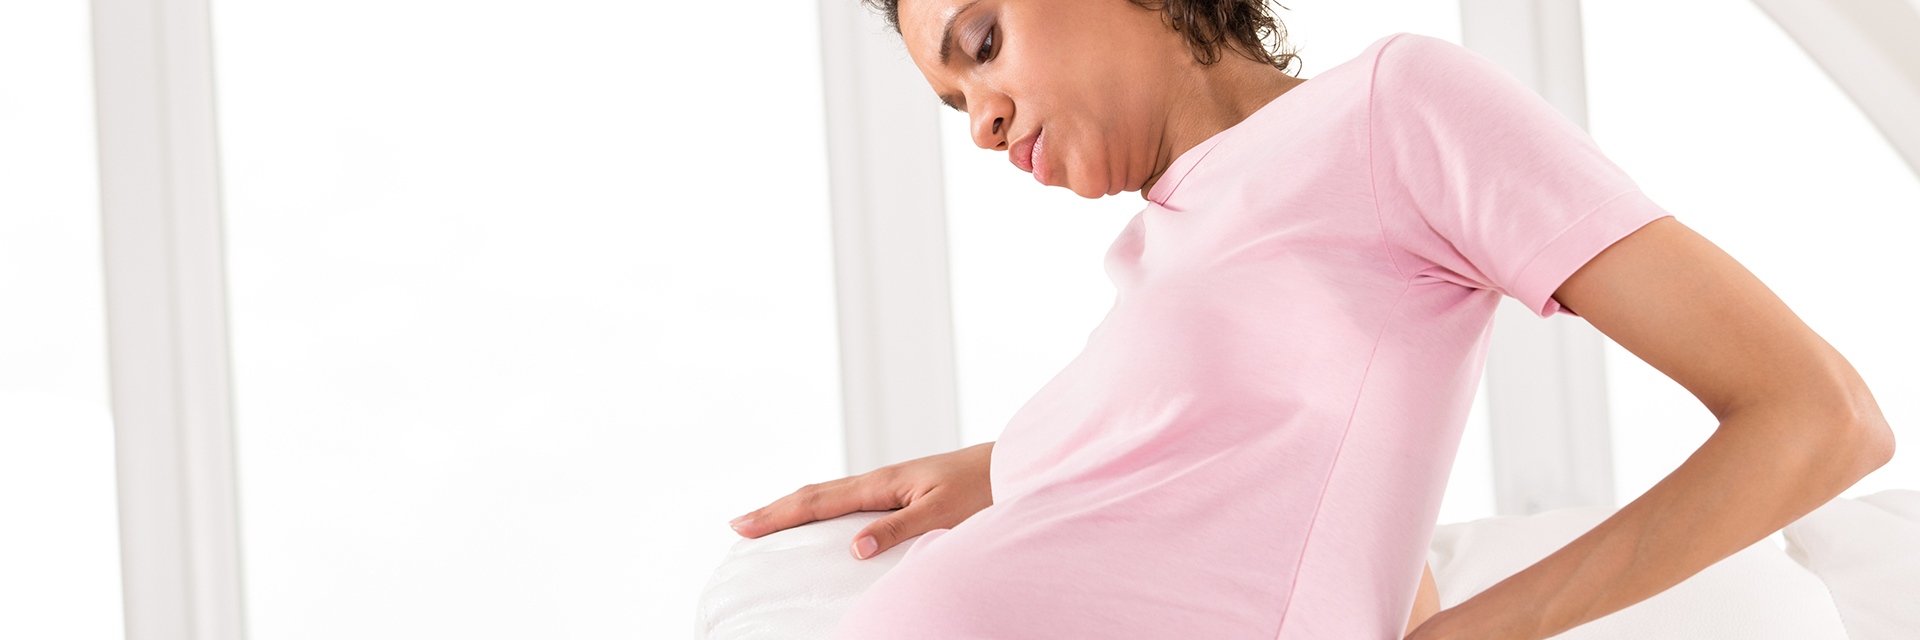 Pregnant woman in pain